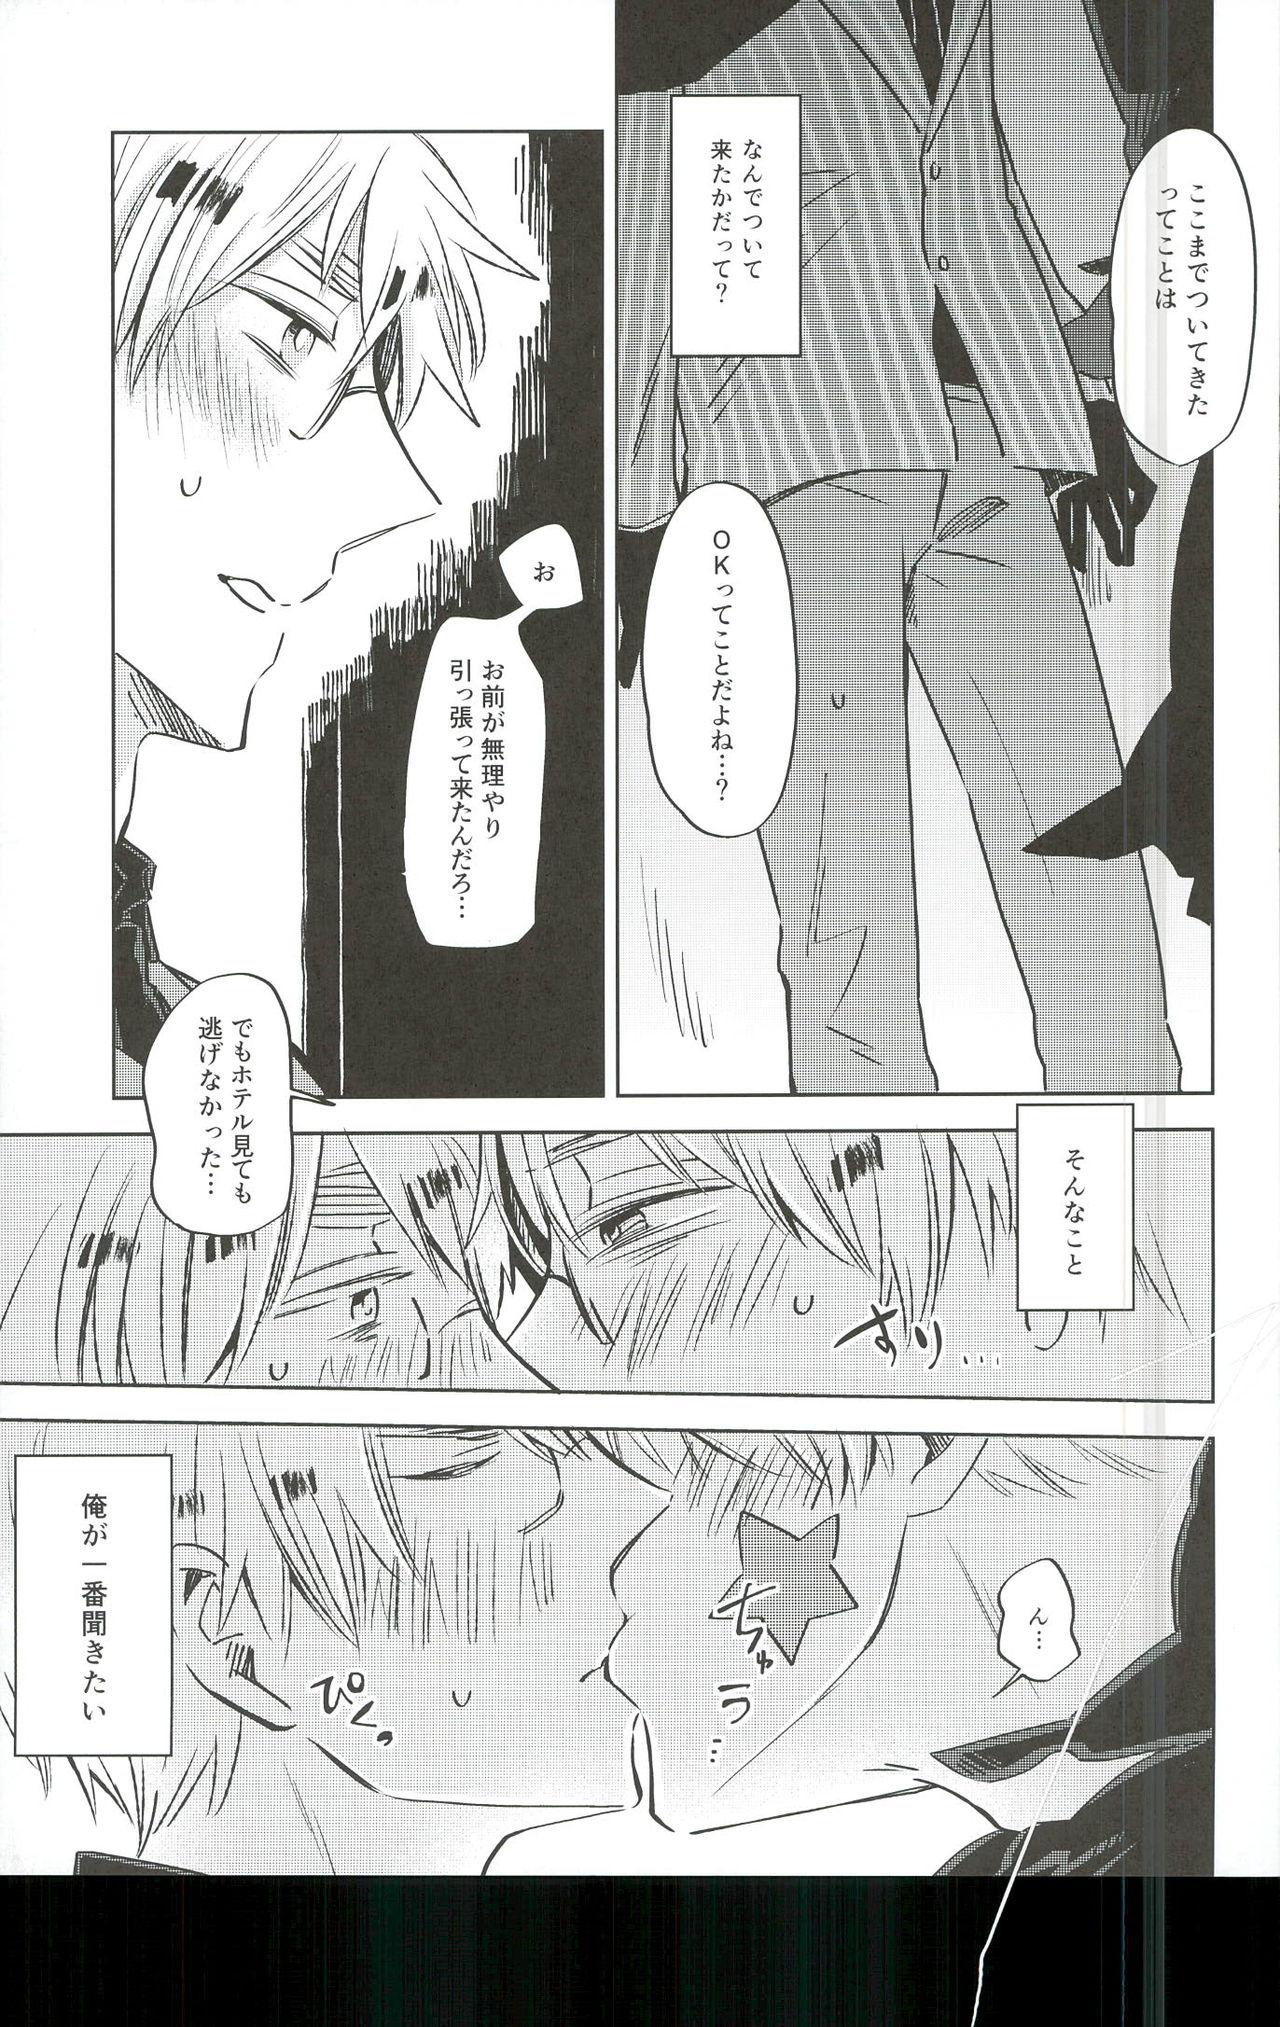 Red Ameagari no Slip Out - Axis powers hetalia Thylinh - Page 4